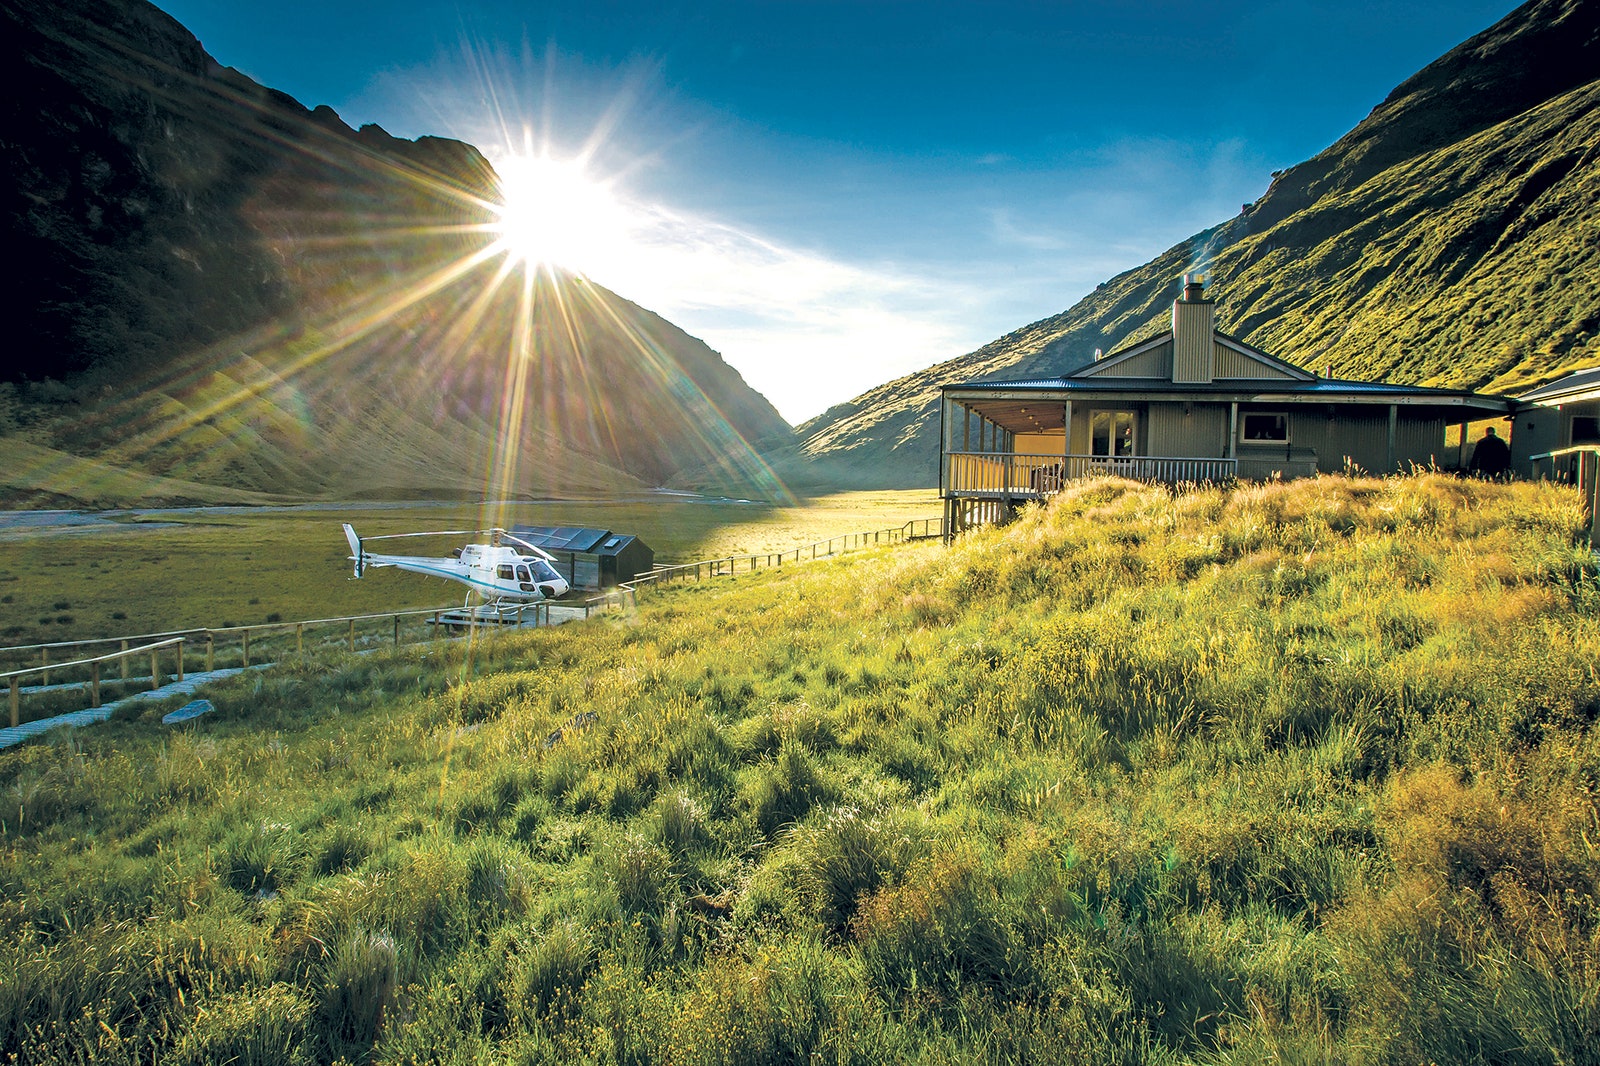 With world-class dining, spectacular scenery, and authentic kiwi hospitality, traveling through New Zealand via its acclaimed luxury lodges is the best way to capture the essence of this remarkable land.